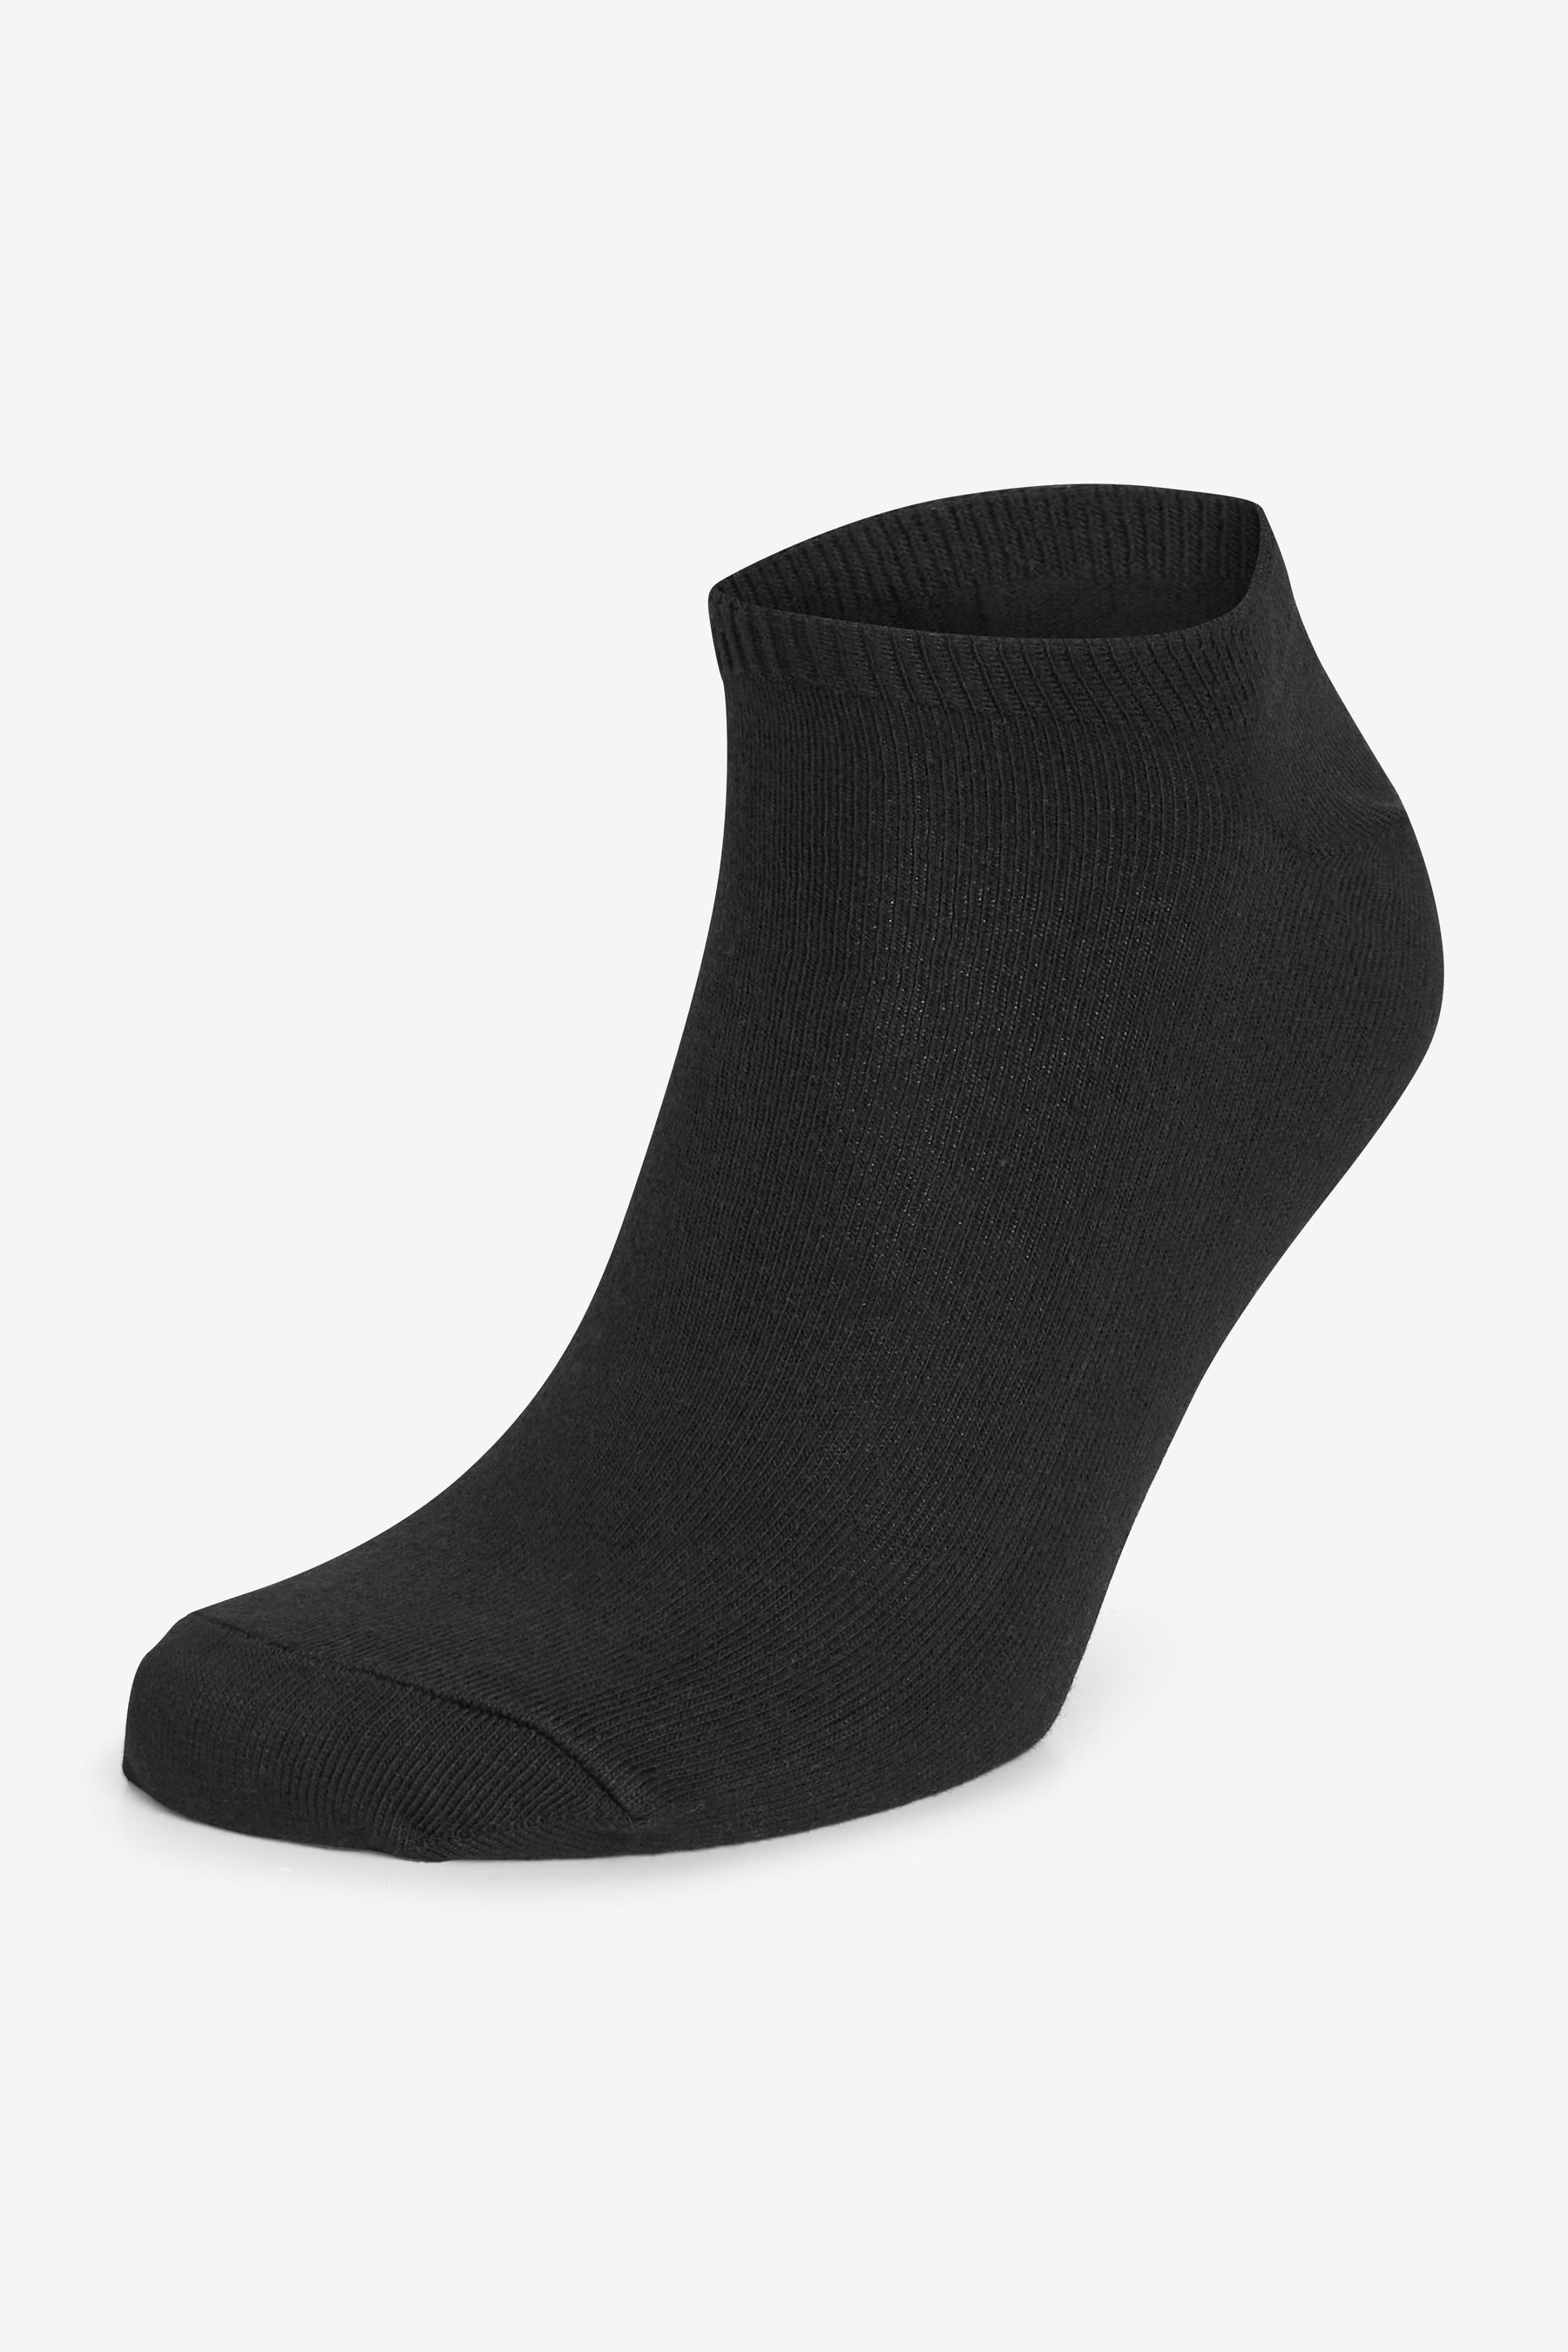 Buy Trainer Socks from the Next UK online shop